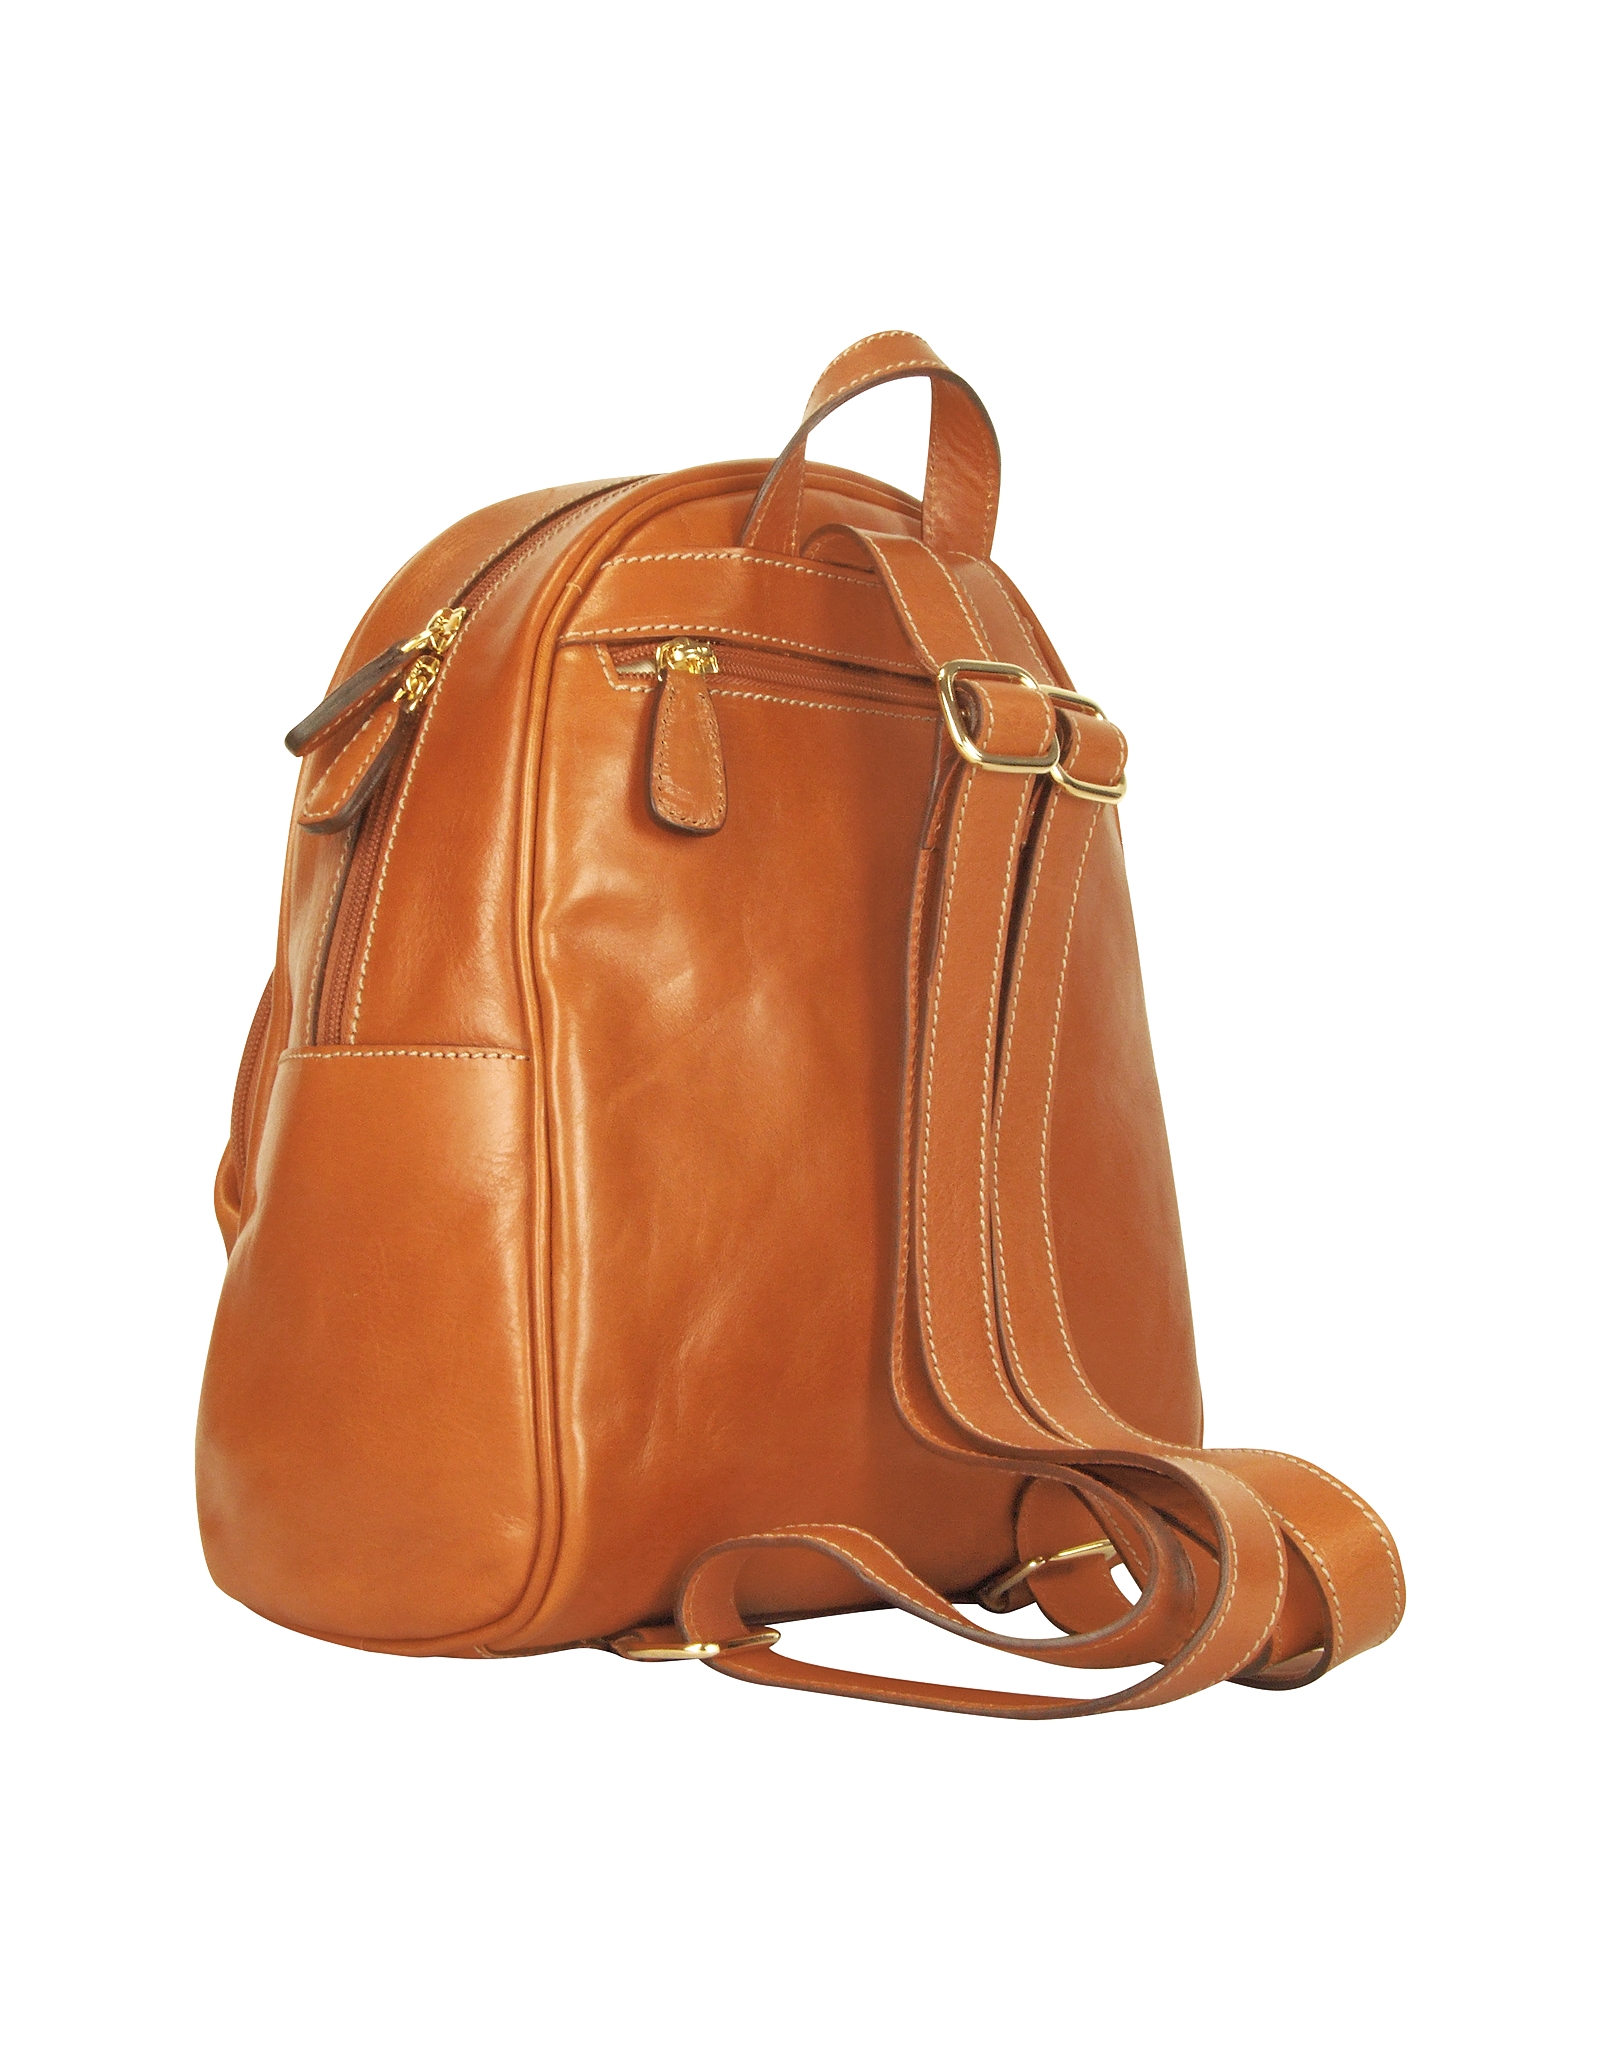 Lyst - Bric'S Life Leather - Genuine Leather Backpack in Brown